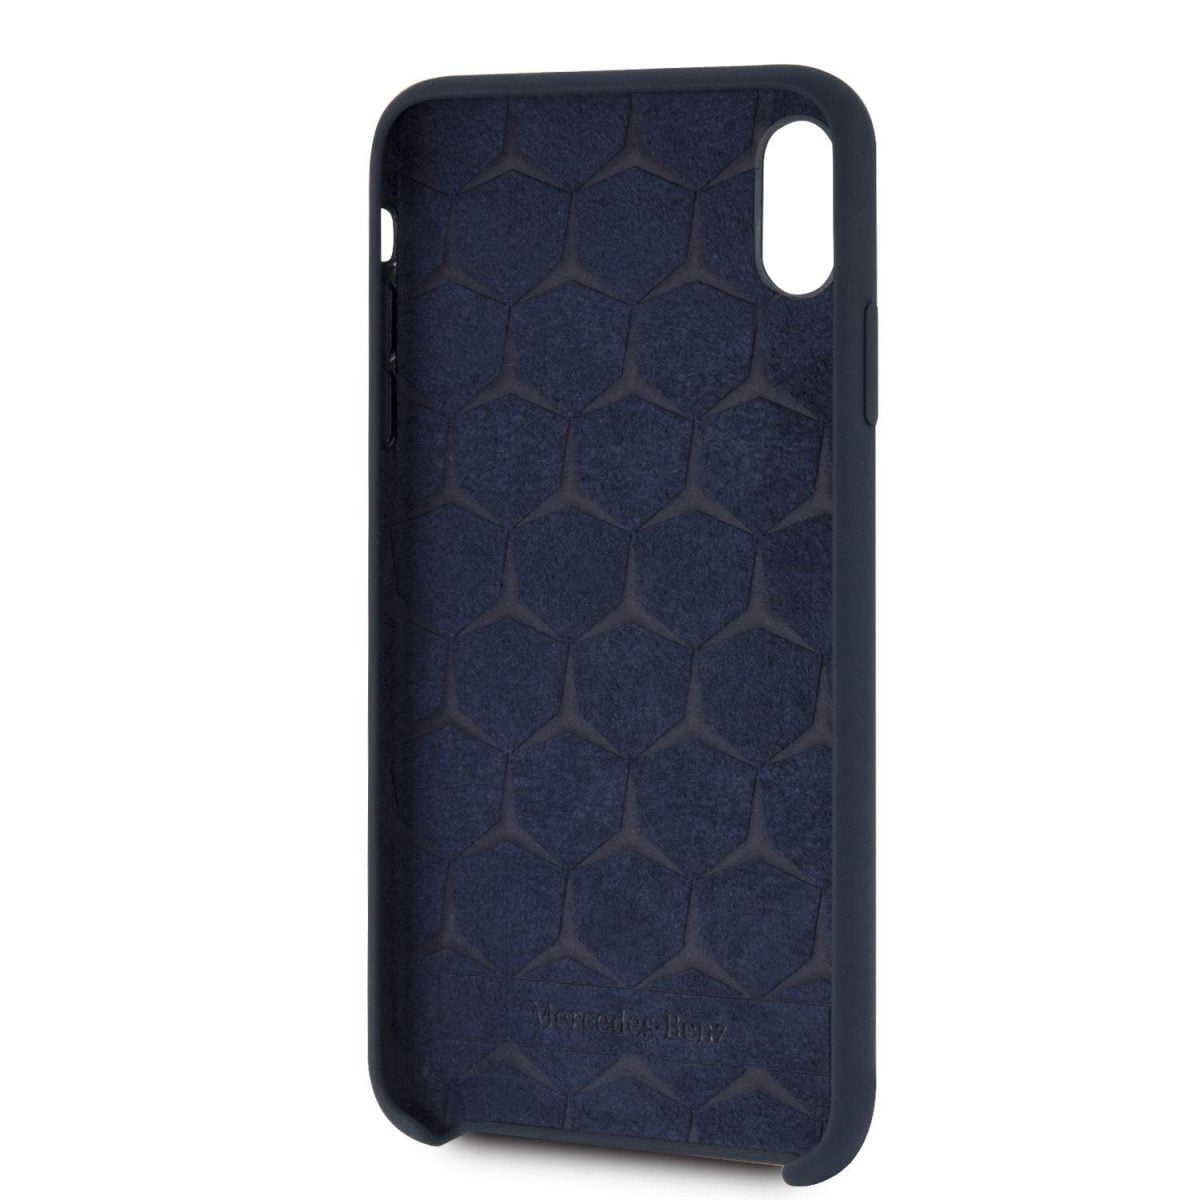 Mercedes Benz Iphone Xs Max Liquid Silicon Silcon Case With Microfiber Lining Navy 04 This Hard Silicone Soft Case With A Sculpted Metallic Mercedes Benz Logo For A 3D Effect Gives You A Classic And Elegant Appeal To Your Handheld Device It Has Easy Accessibility For All Ports And Buttons. Case Compatible With Wireless Chargers. Soft Microfiber Interior, Easy To Hold &Amp; Easy Snap-On Design Makes It Fast And Easy To Install Or Take Off In Seconds This Case Provides Both The Ultimate Luxury Experience And Protection From Scratches And Abrasions By Slightly Raised Edges Iphone Silicon Case Iphone Xs Max Liquid Silicon - Silicon Case With Microfiber Lining (Navy Blue) Mercedes-Benz